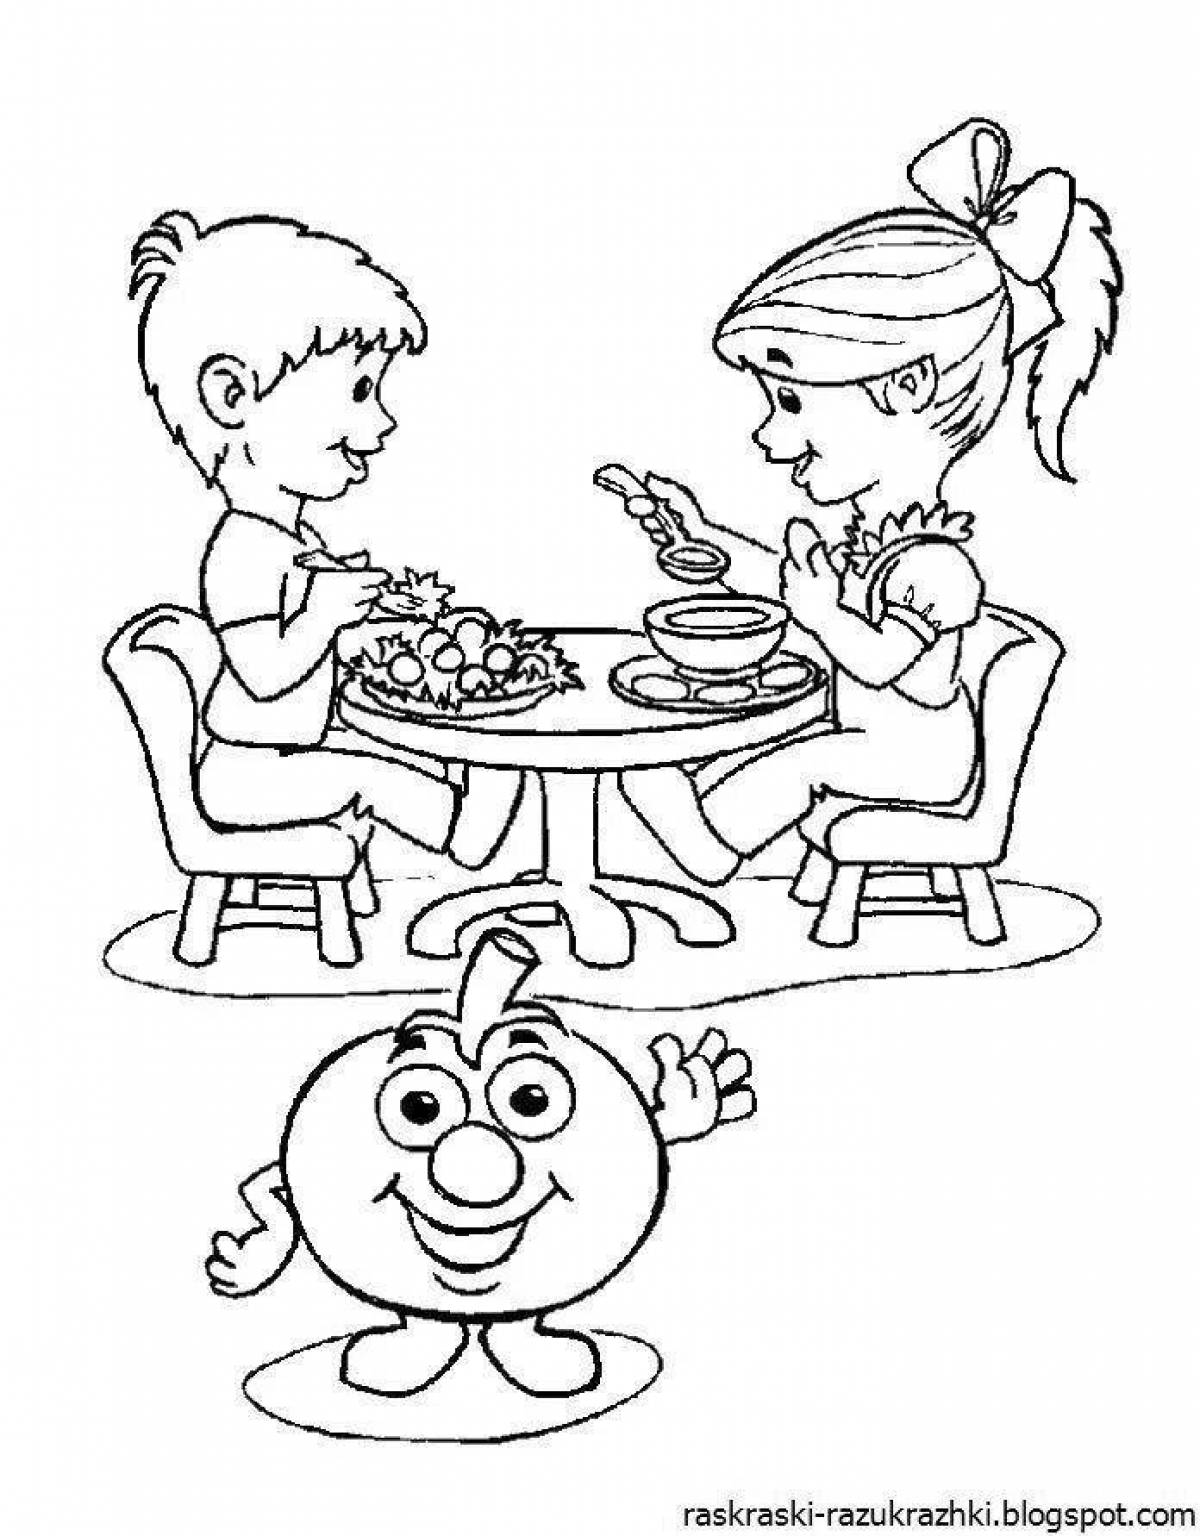 Creative nutrition coloring page